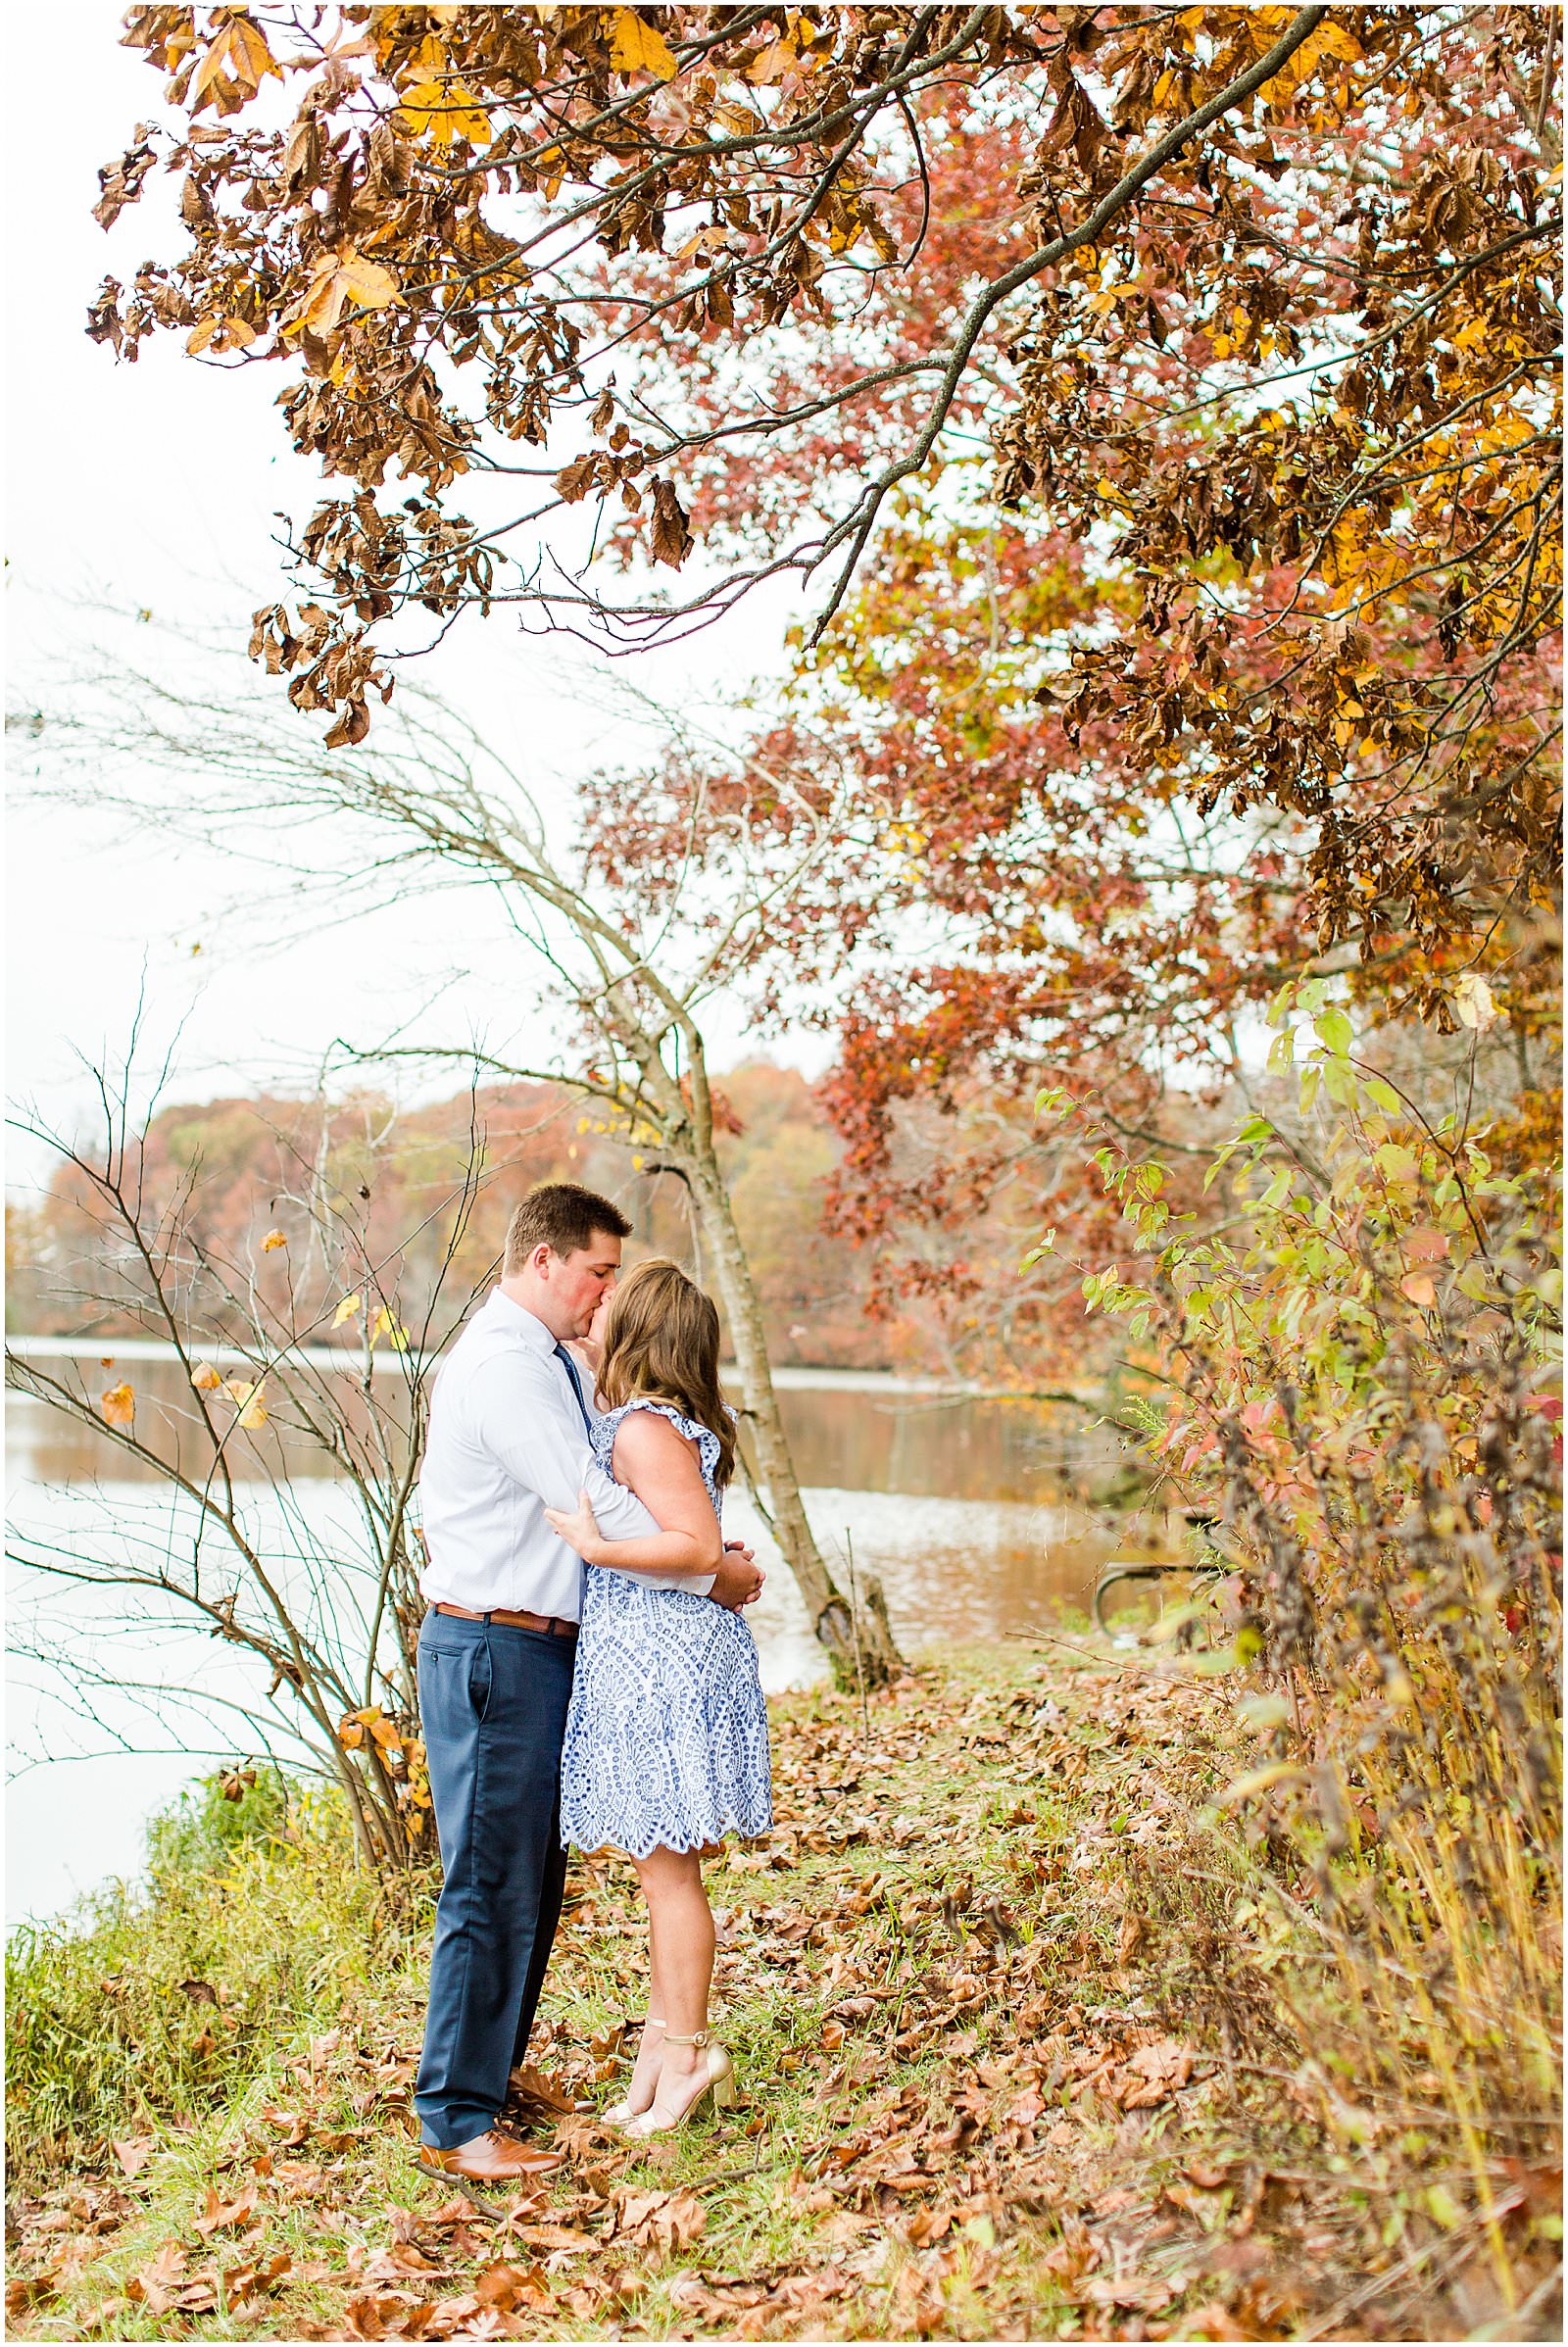 A Southern Illinois Engagement Session | Roxanne and Matthew | Bret and Brandie Photography 0012.jpg